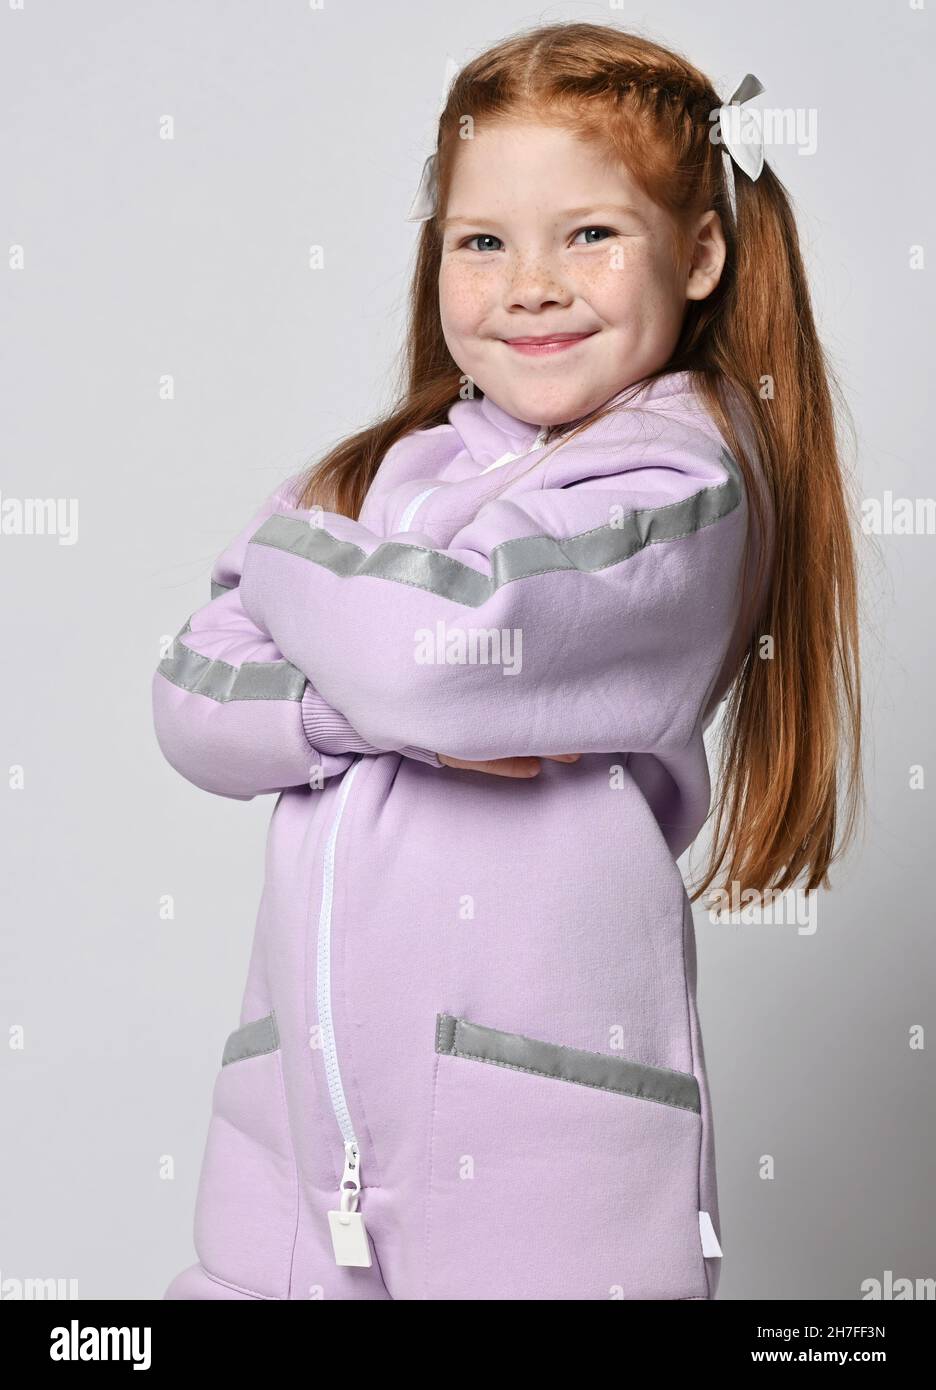 Portrait of cute smiling kid girl in pink modern jumpsuit standing with arms crossed at chest, looking at camera Stock Photo